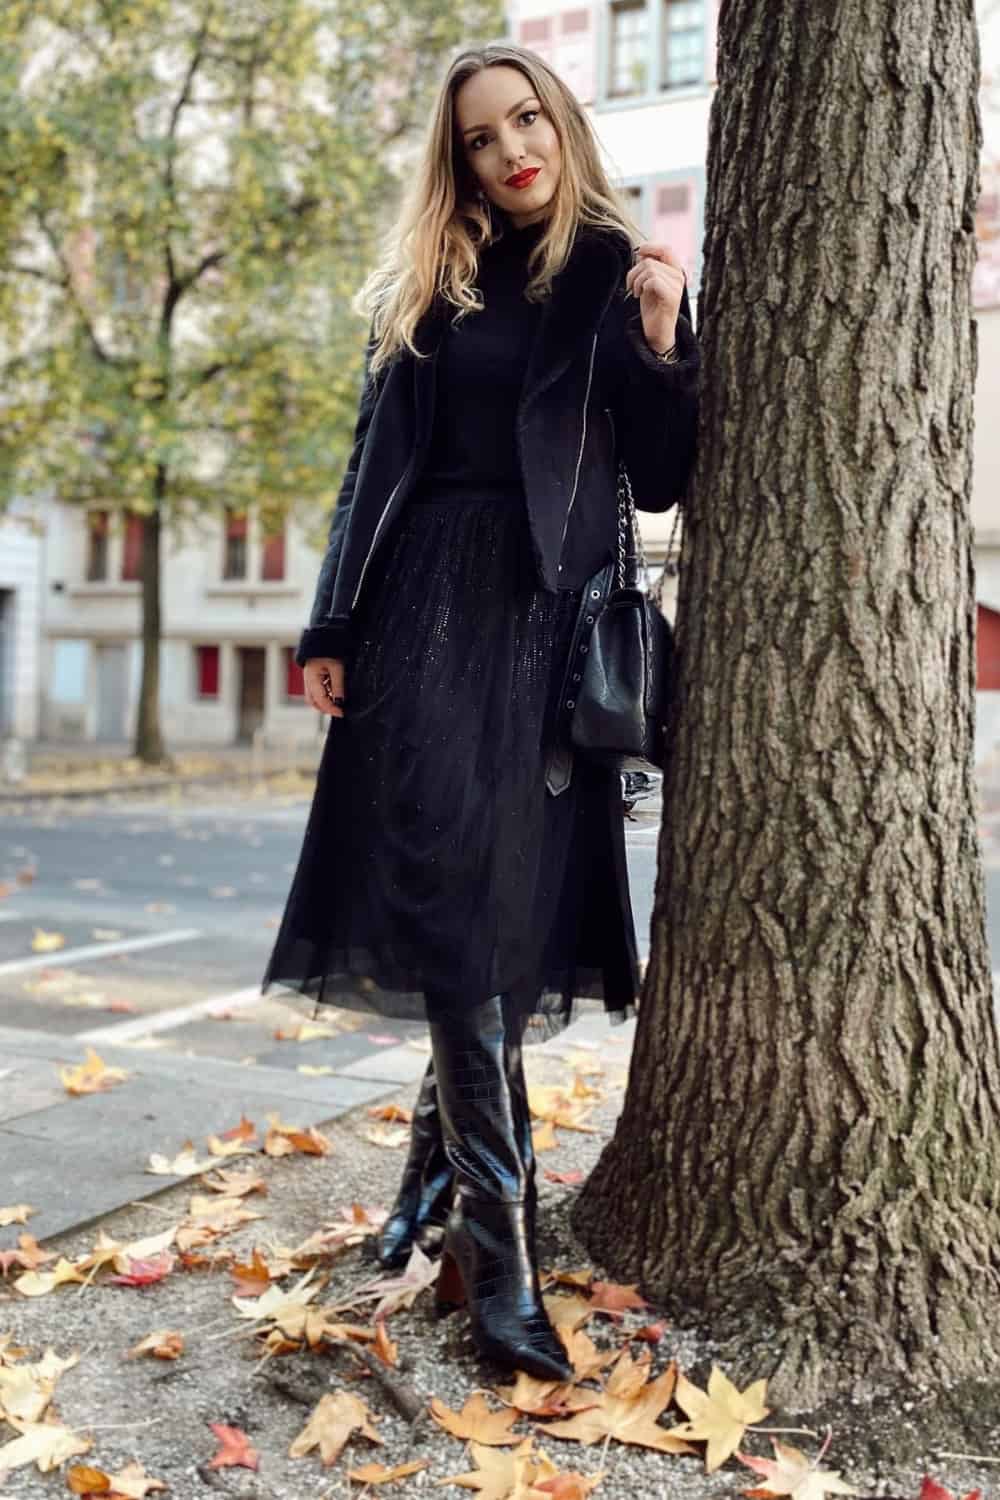 Black Turtleneck Sweater Outfit with Tulle Skirt